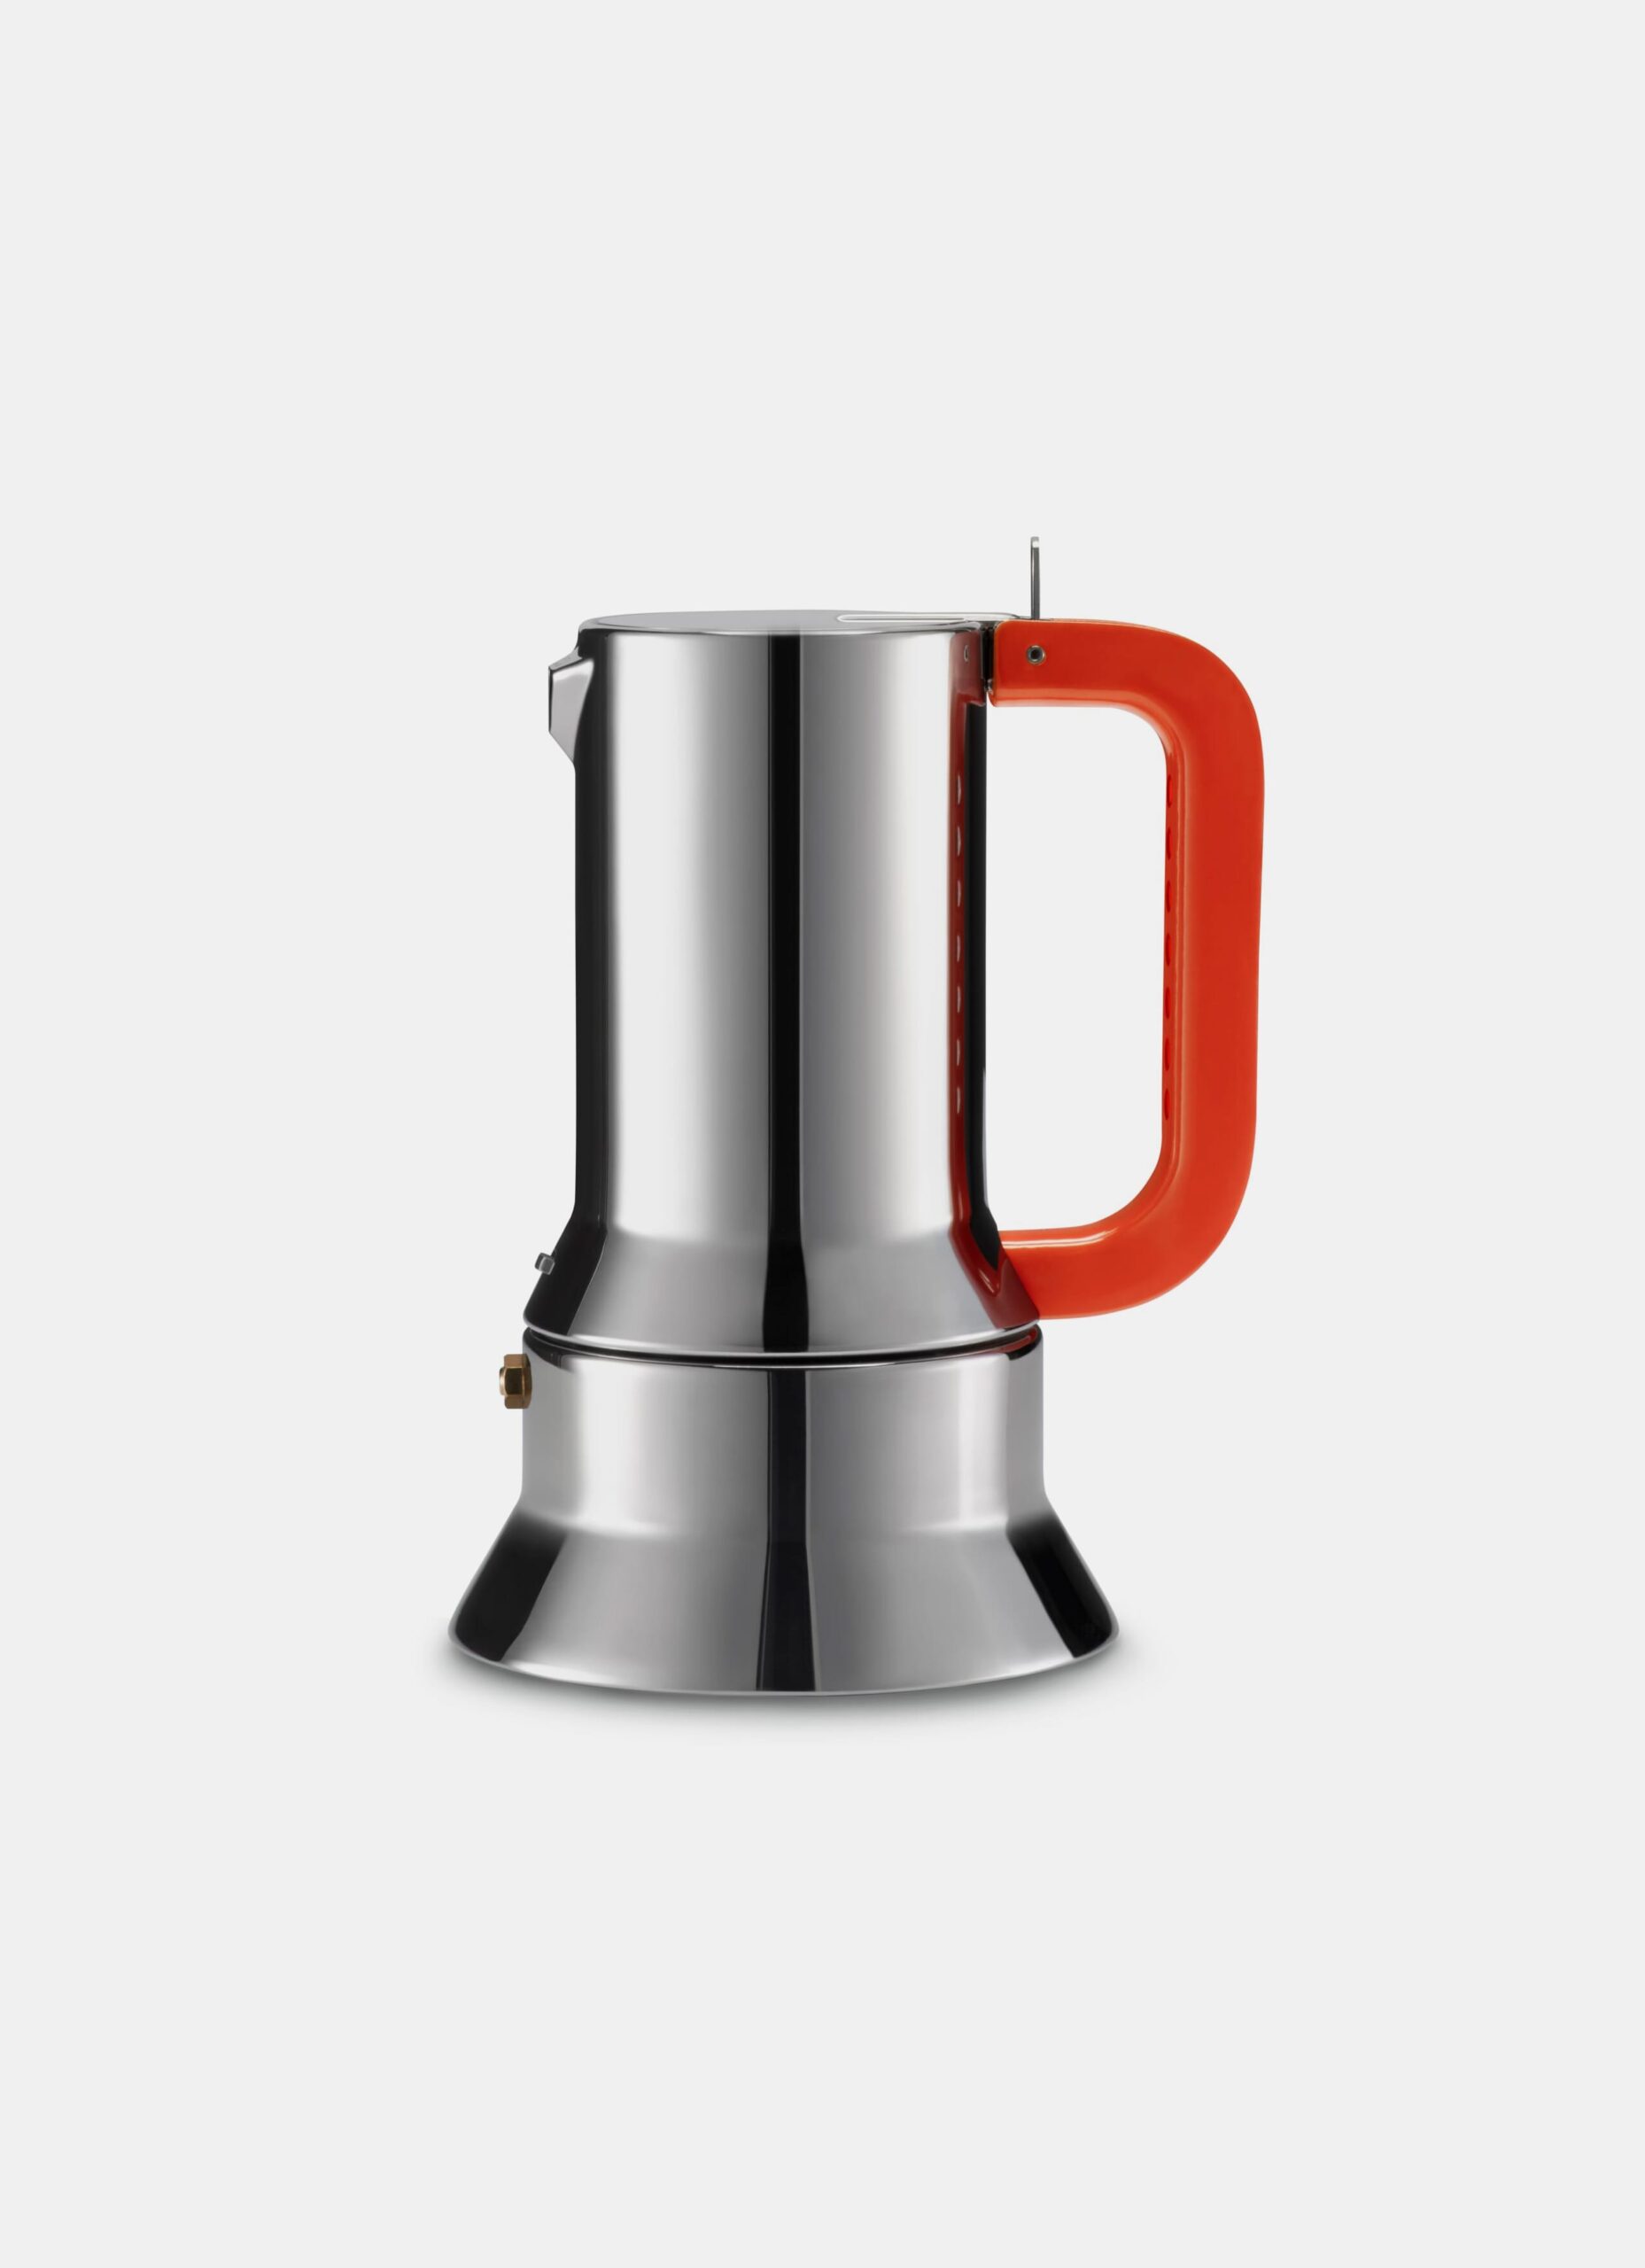 Alessi - 9090 manico forato - Espresso maker - Richard Sapper - 3 cups - Stainless Steel - Induction